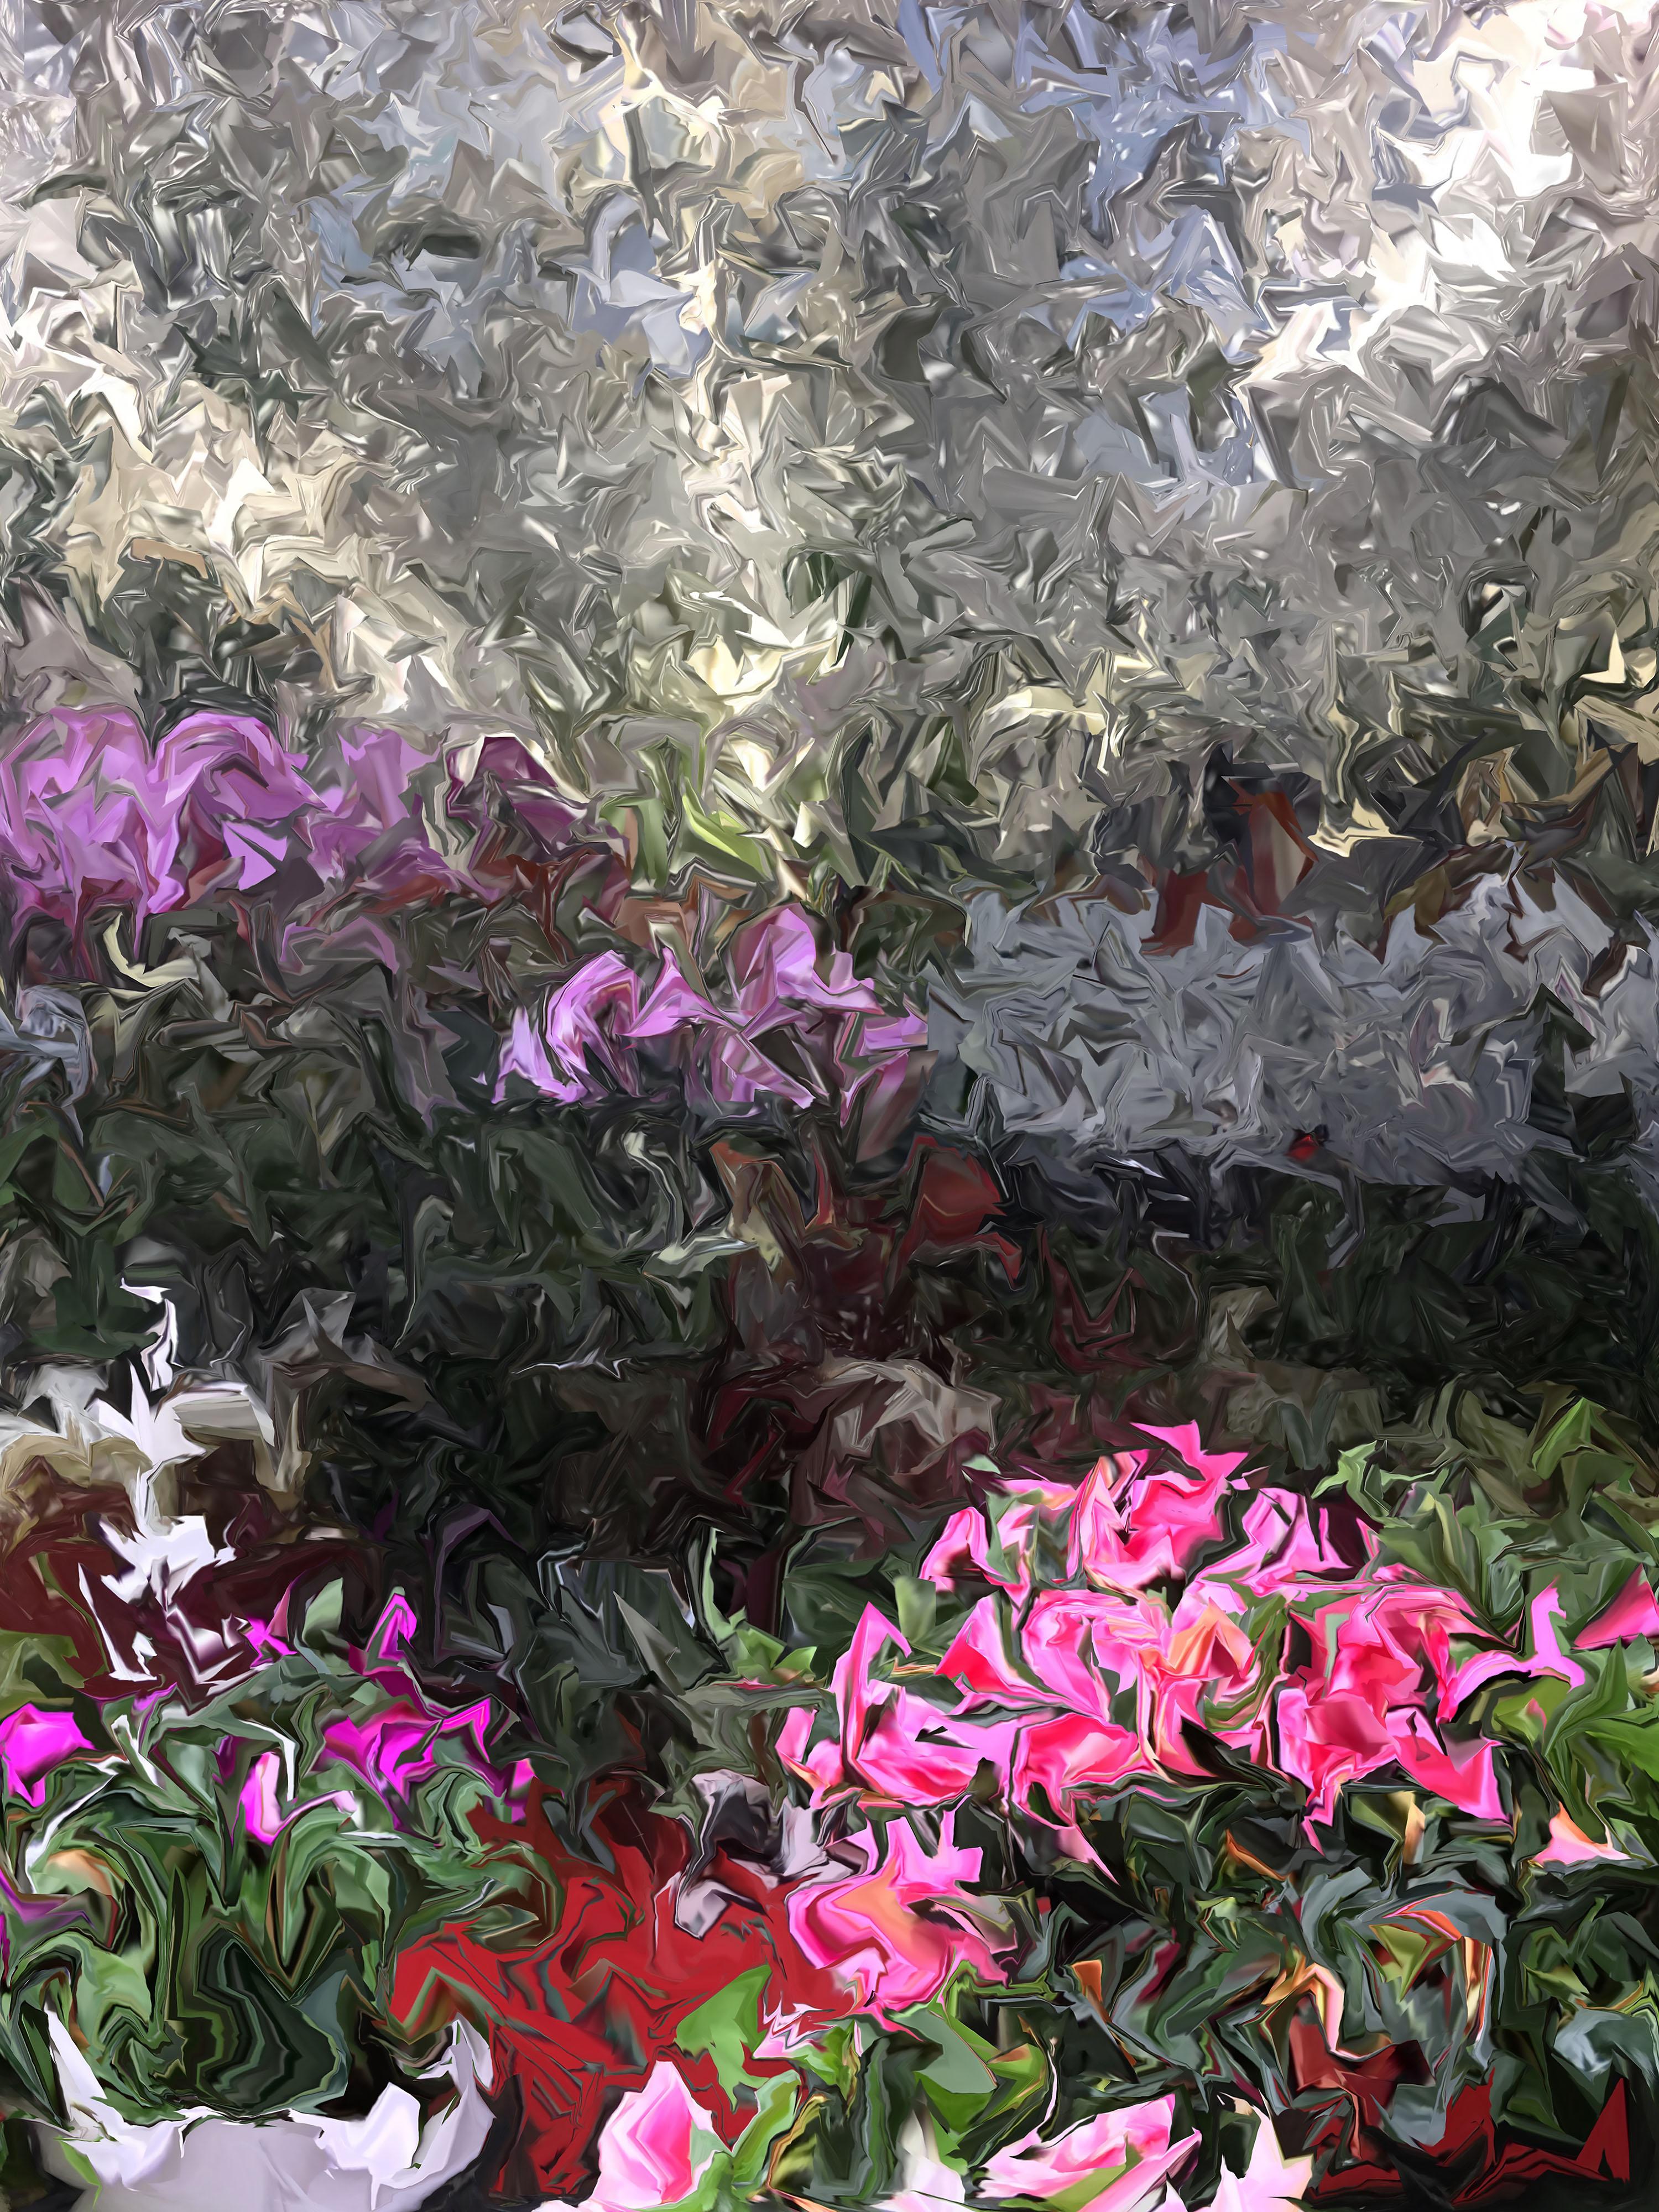 Azaleas and Orchids, 2018, digitally manipulated photograph, signed